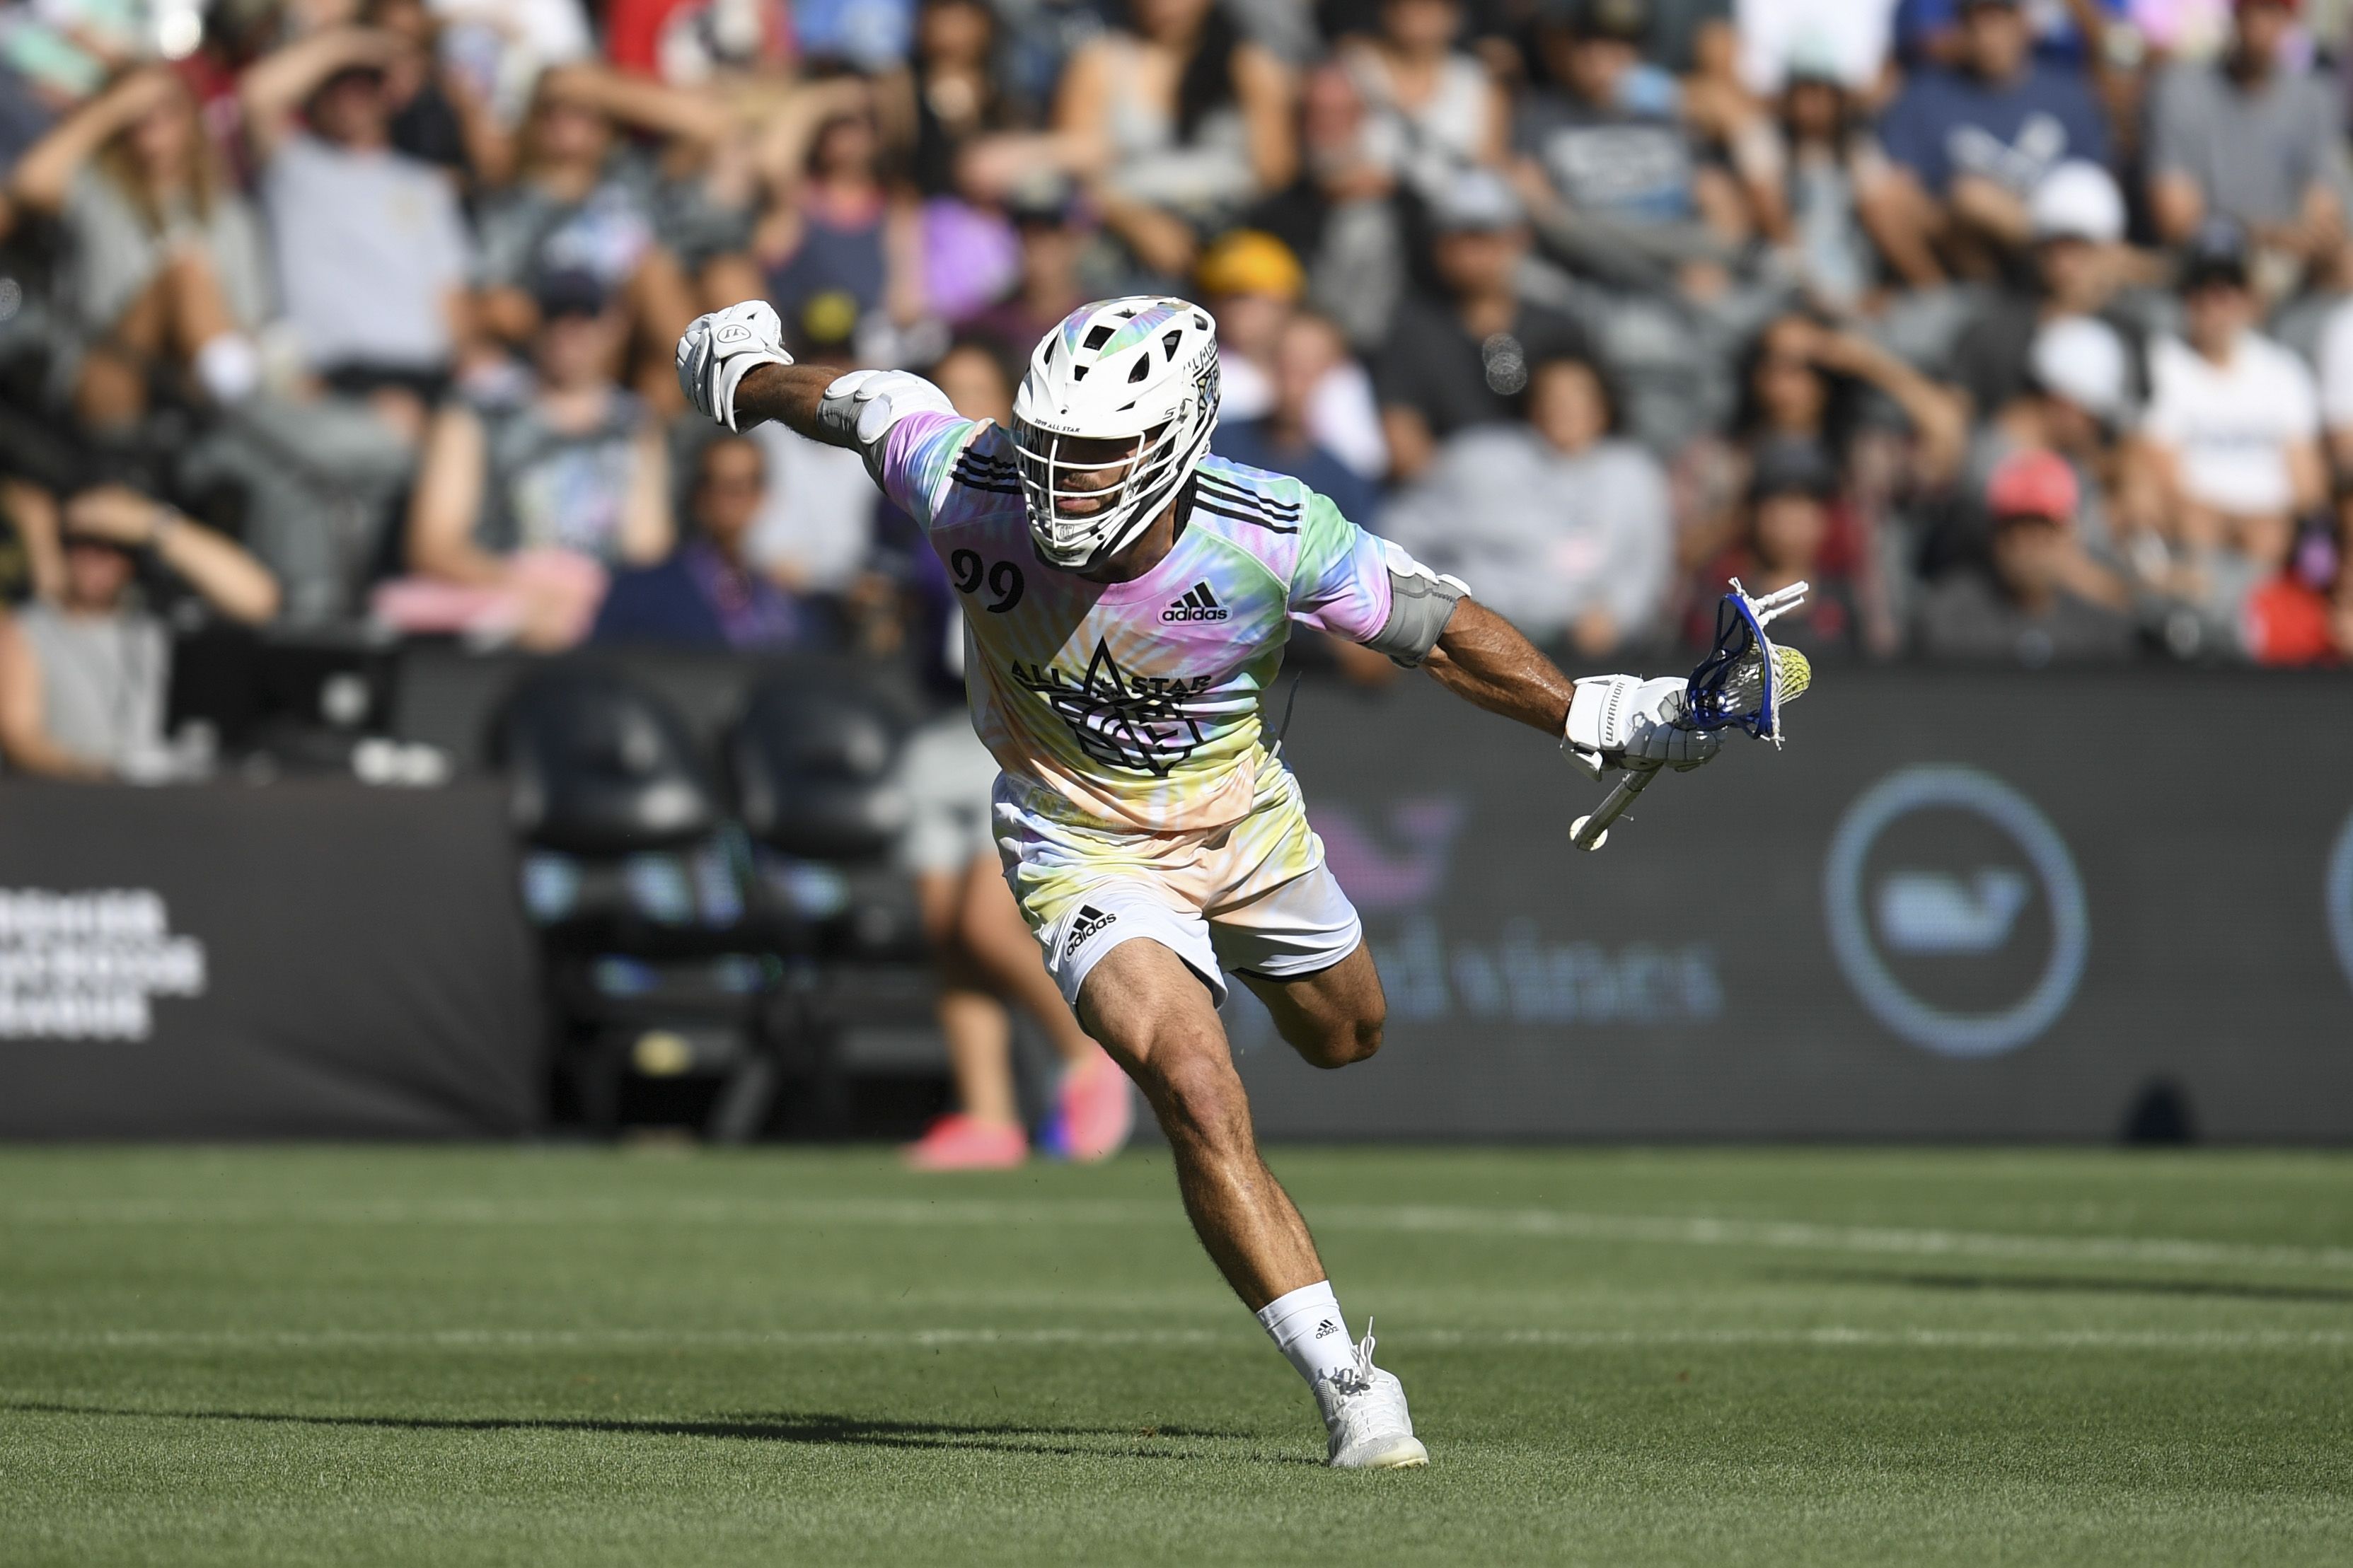 Premier Lacrosse League 2023 All-Star Game & Skills Competition